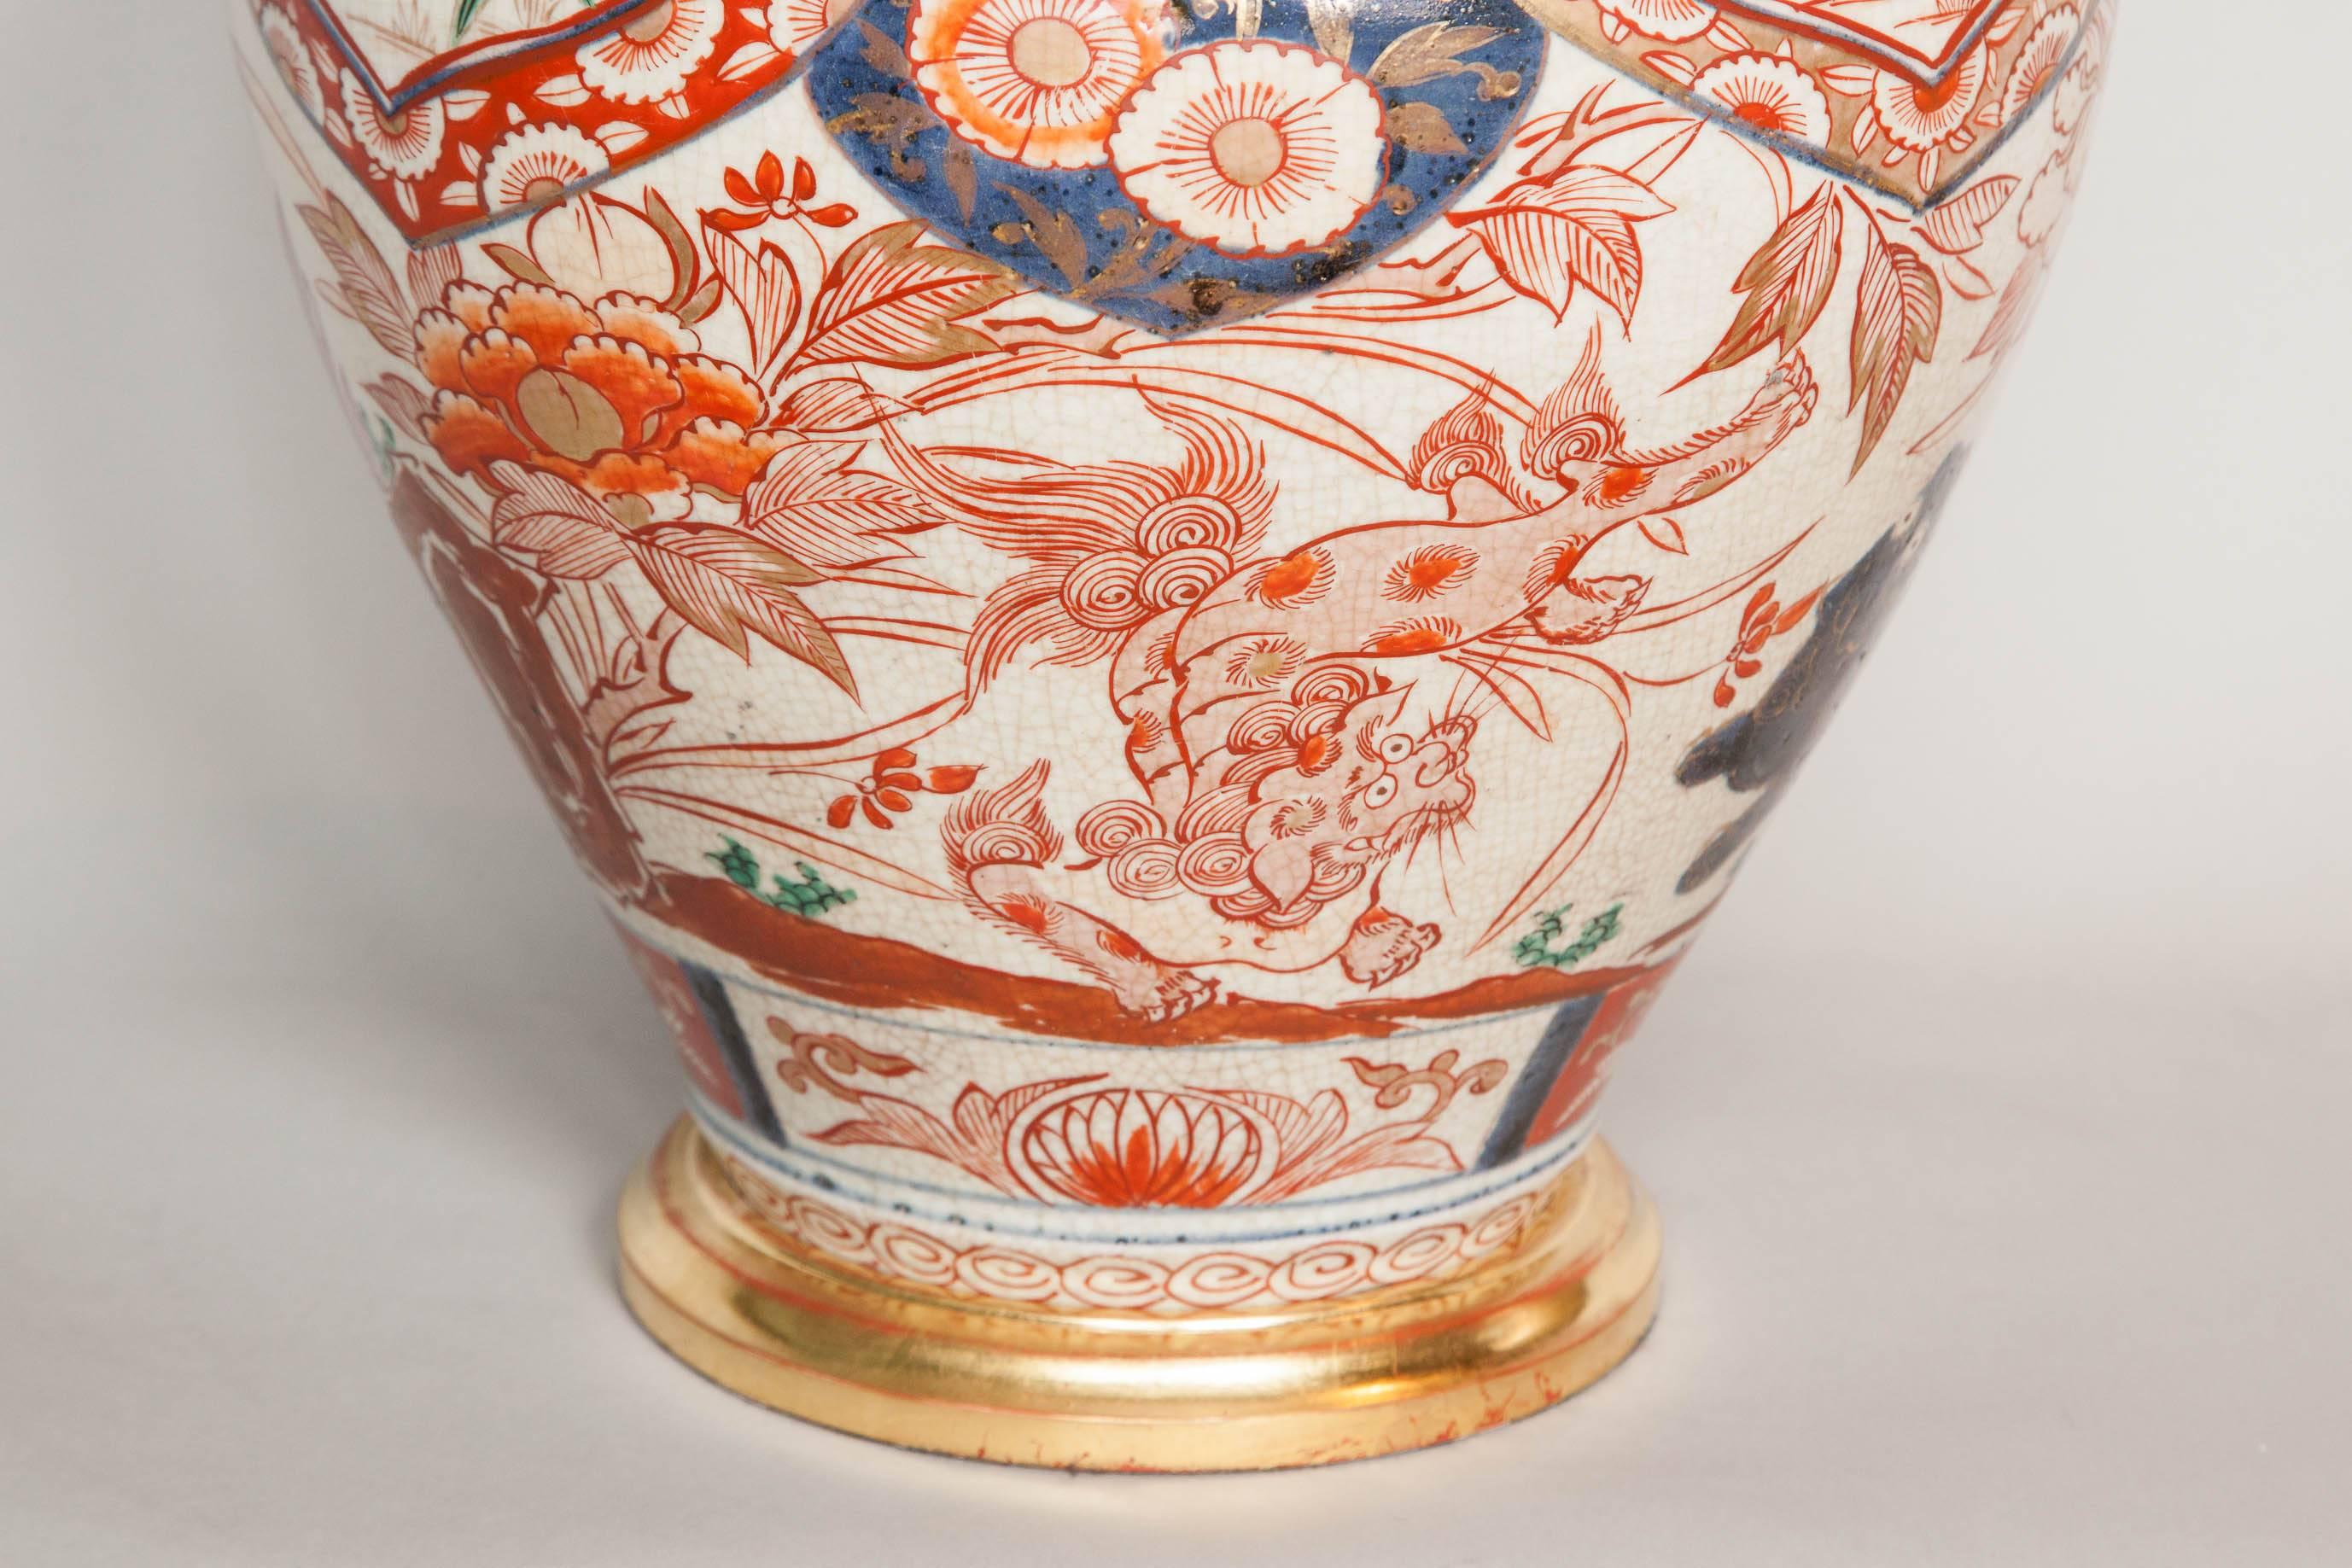 Interesting pair of bulbous Japanese Imari vases, one in perfect condition and one with few restoration on the back dating from ca. 1680-1700.
The decoration features a generous use of red and orange making this pair of lamps particularly decorative